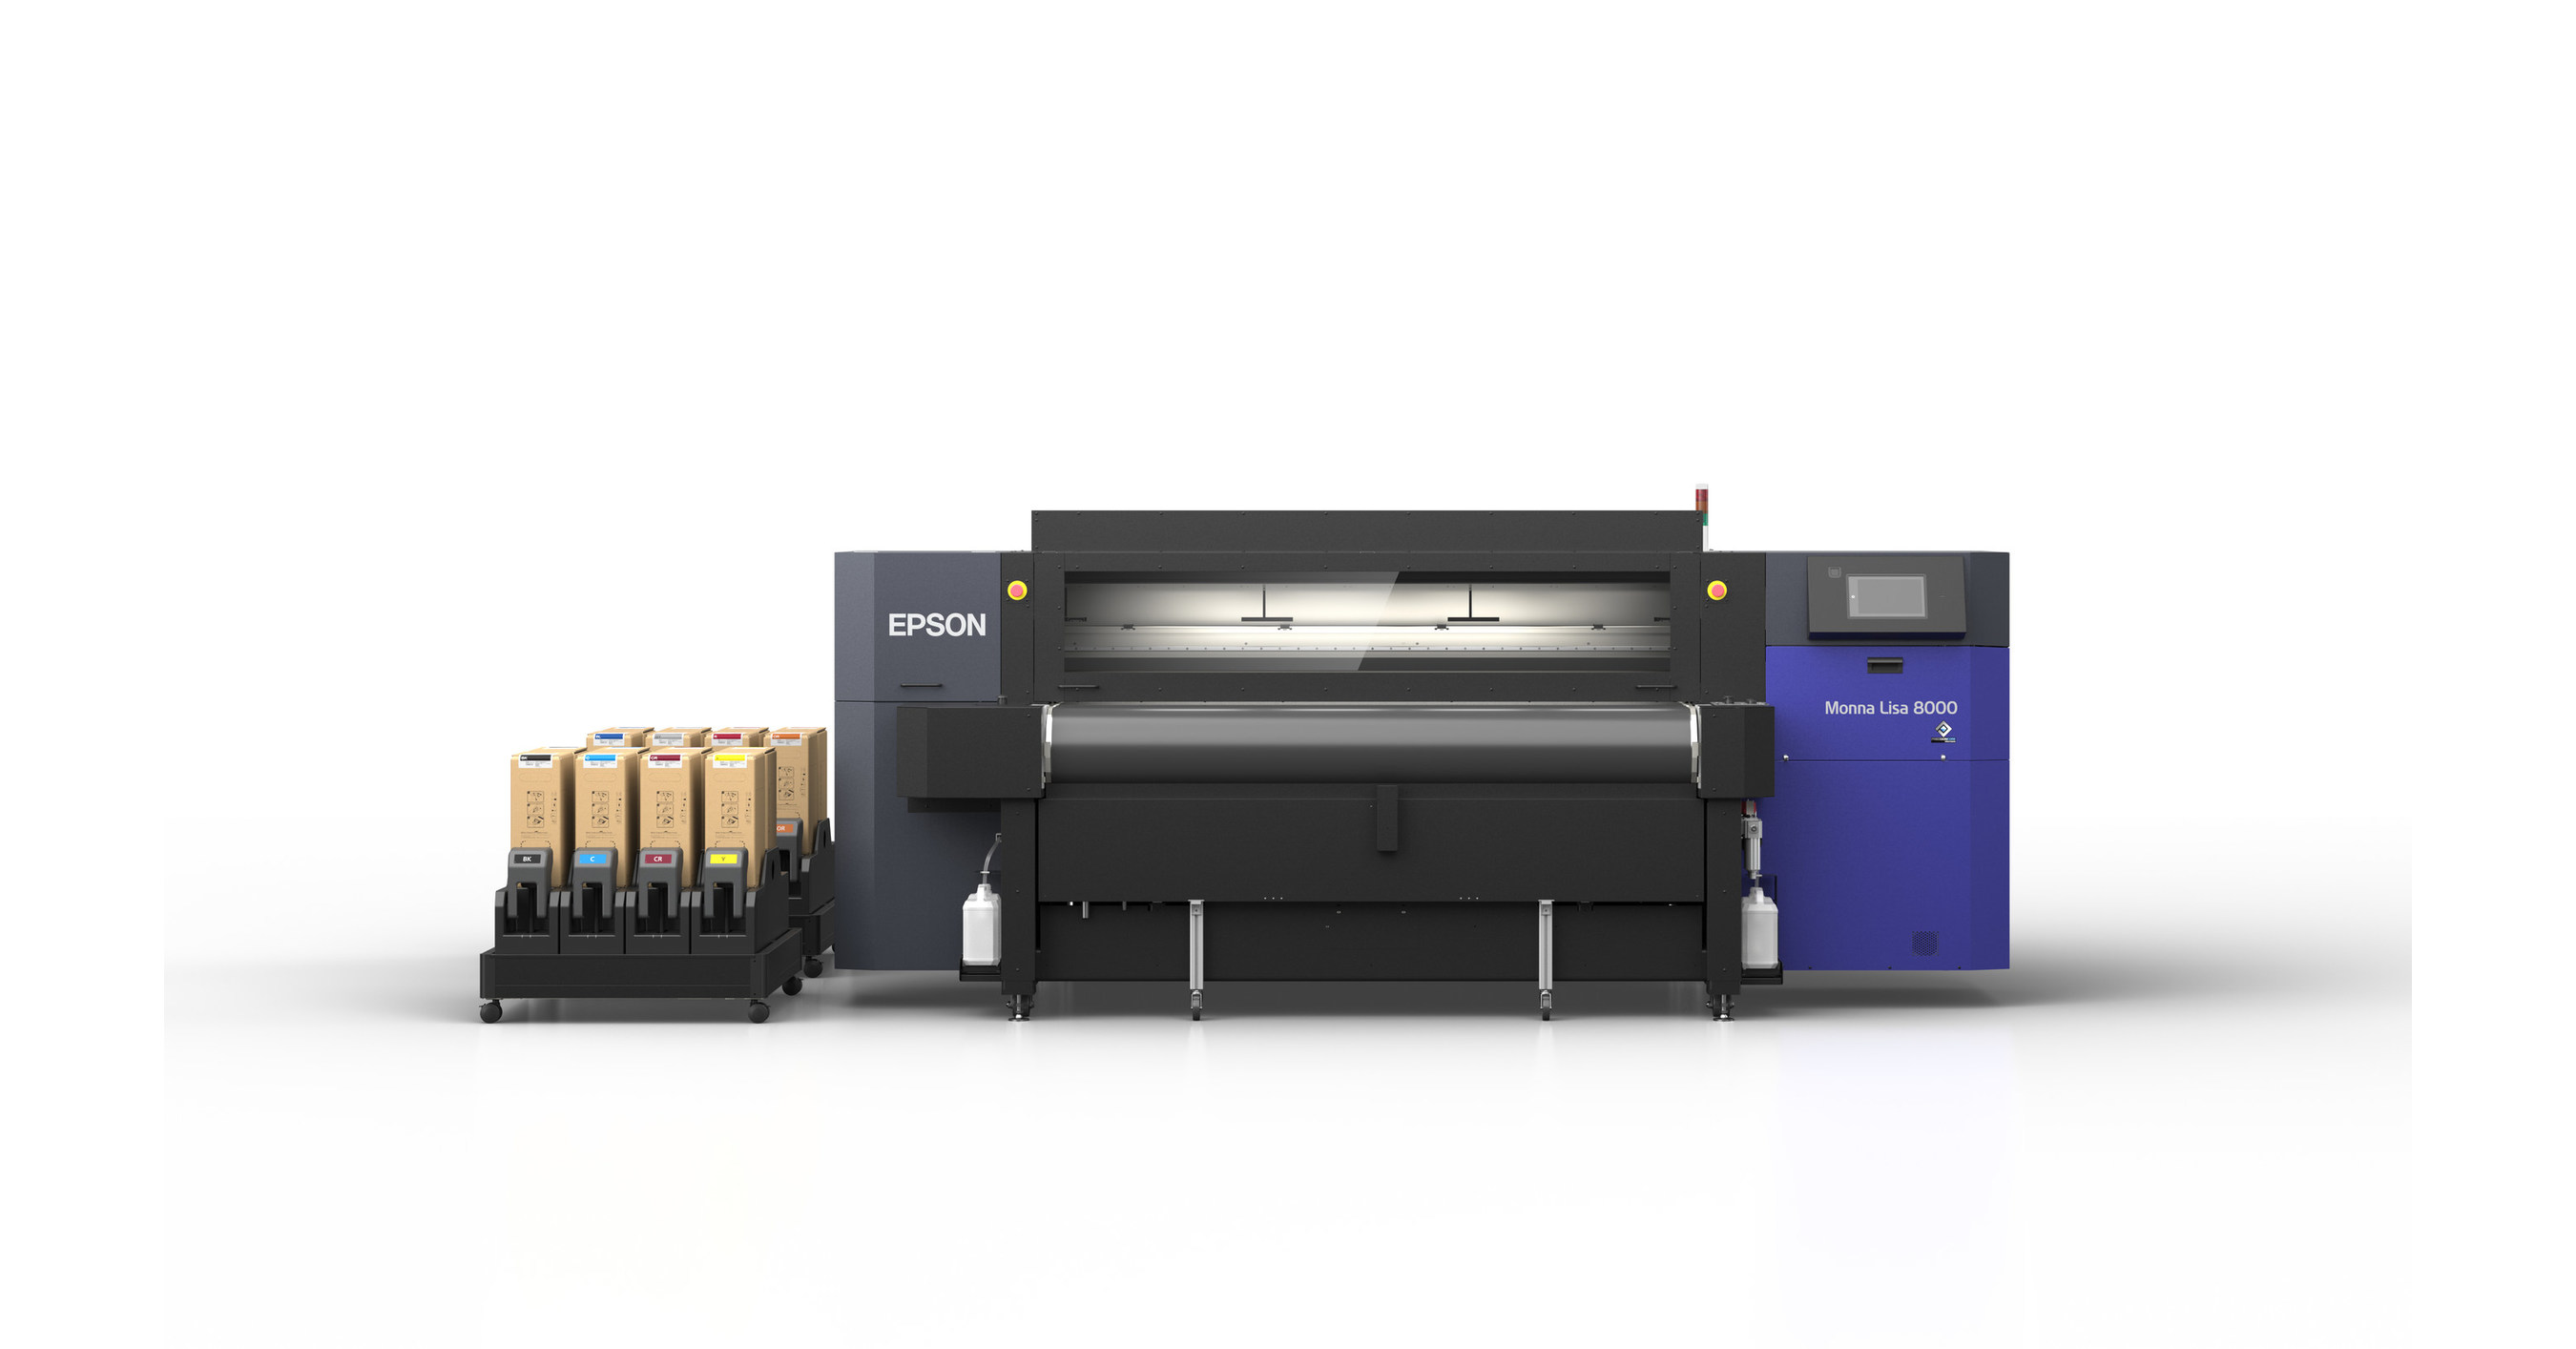 Epson Introduces its First Direct-to-Fabric for